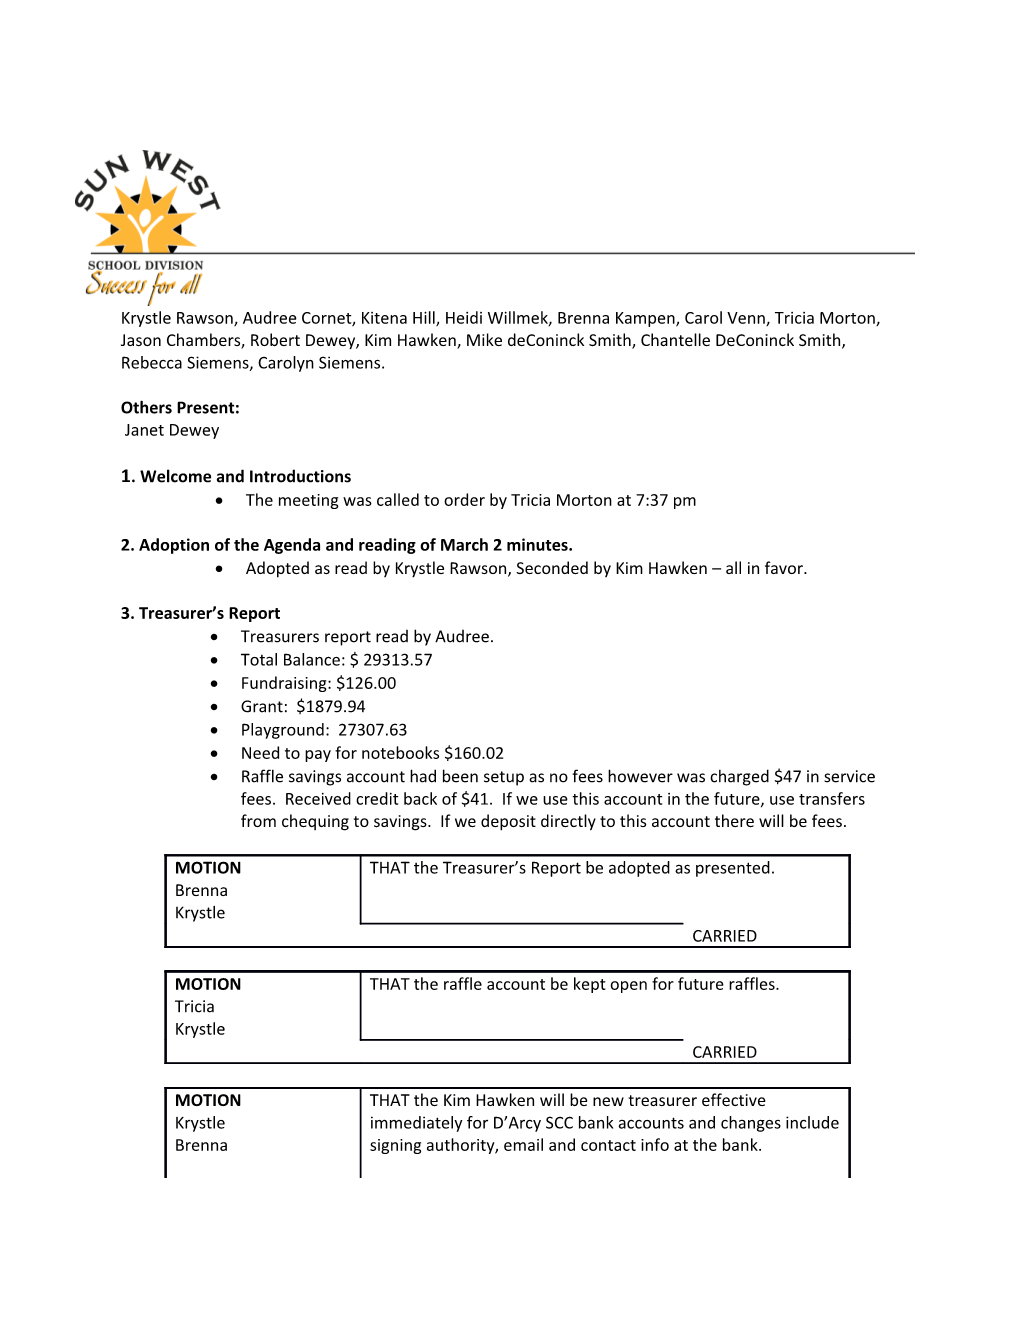 School Community Council Meeting Minutes May 11, 2016